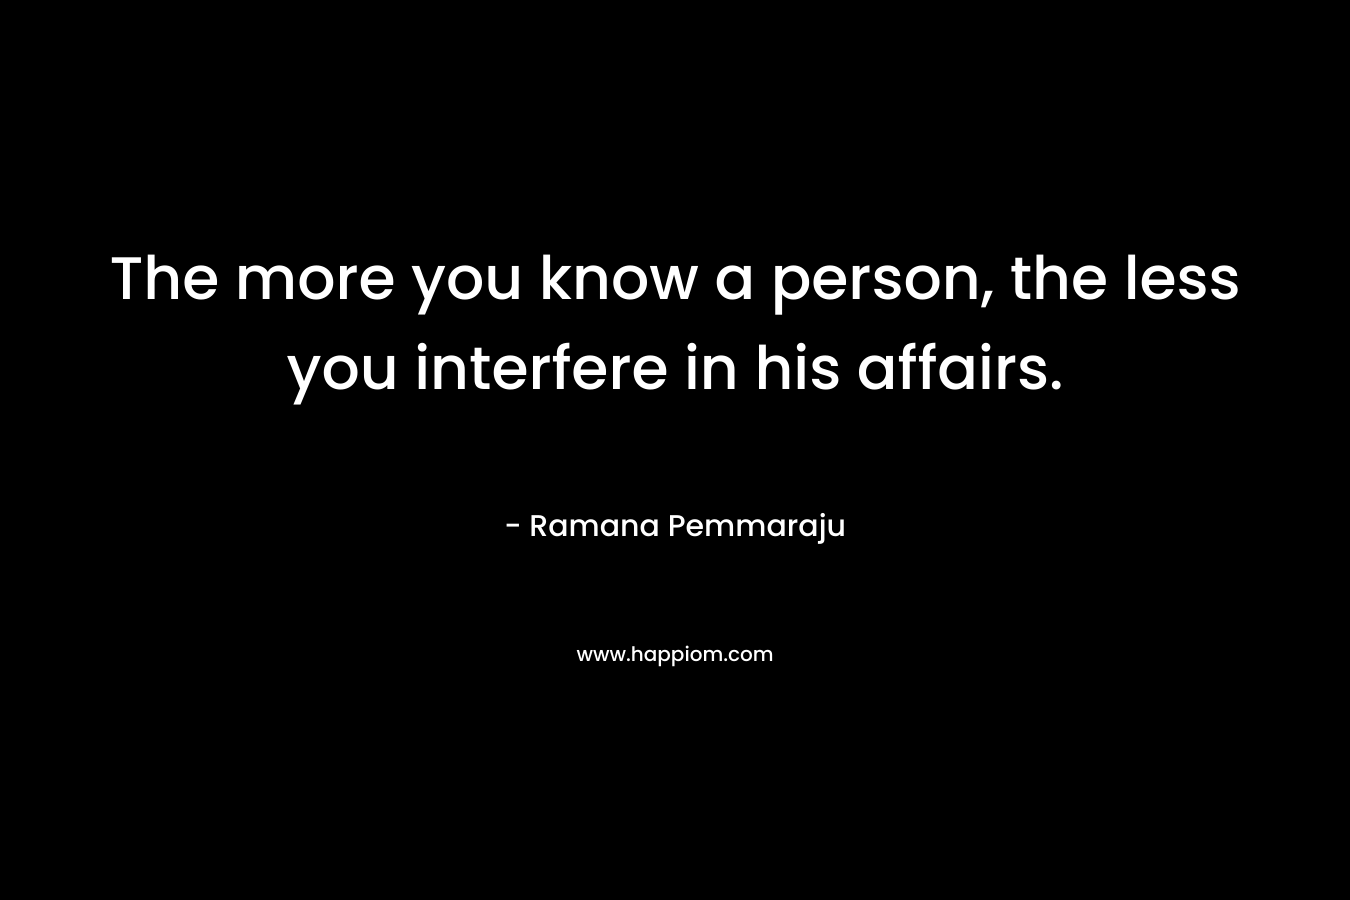 The more you know a person, the less you interfere in his affairs.